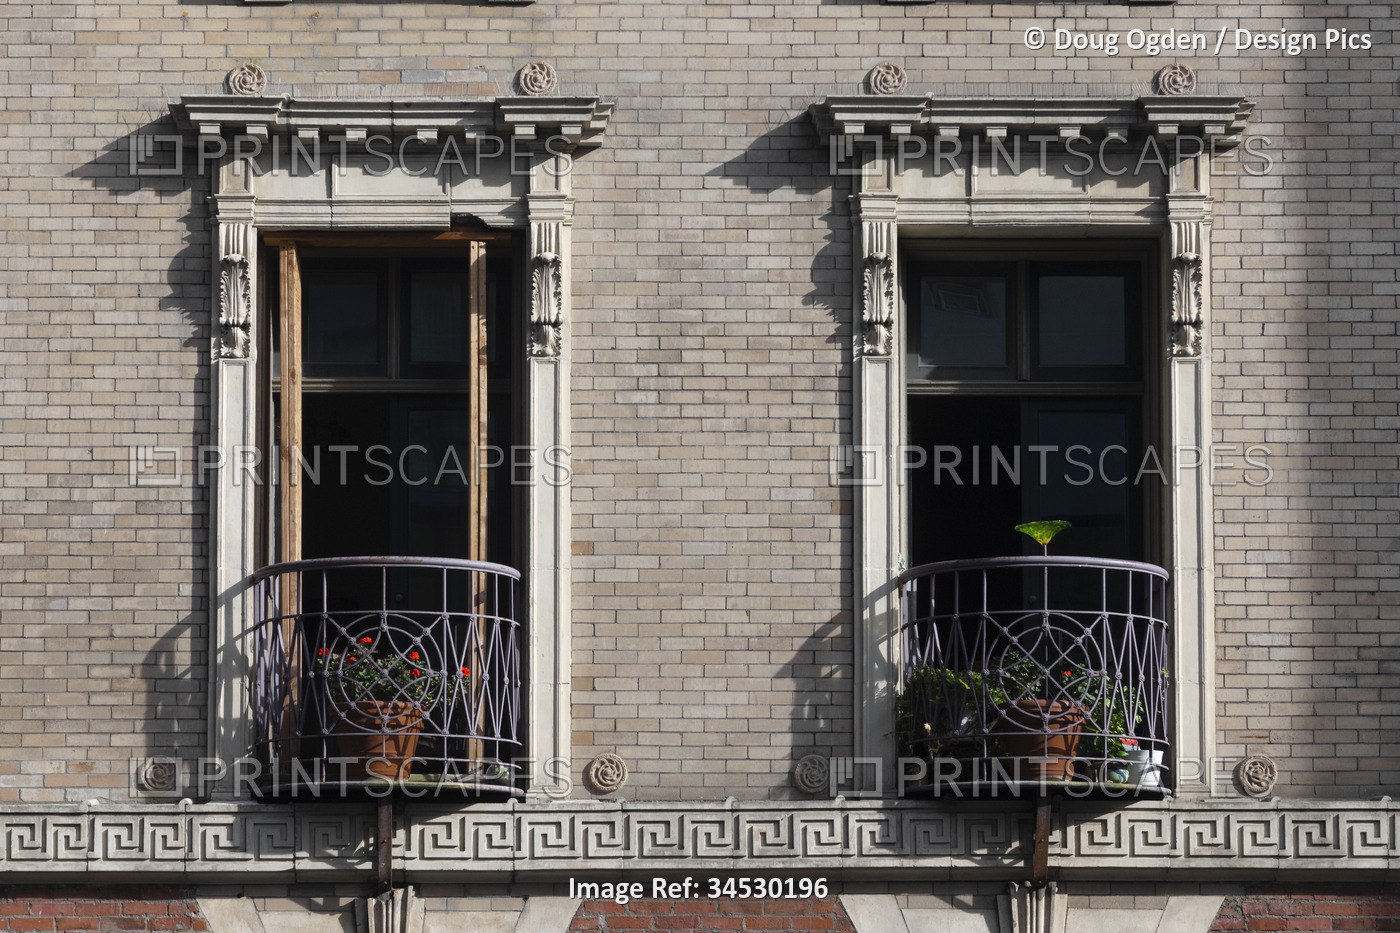 Decorative balconies on a residential building. The wrapped wrought iron ...